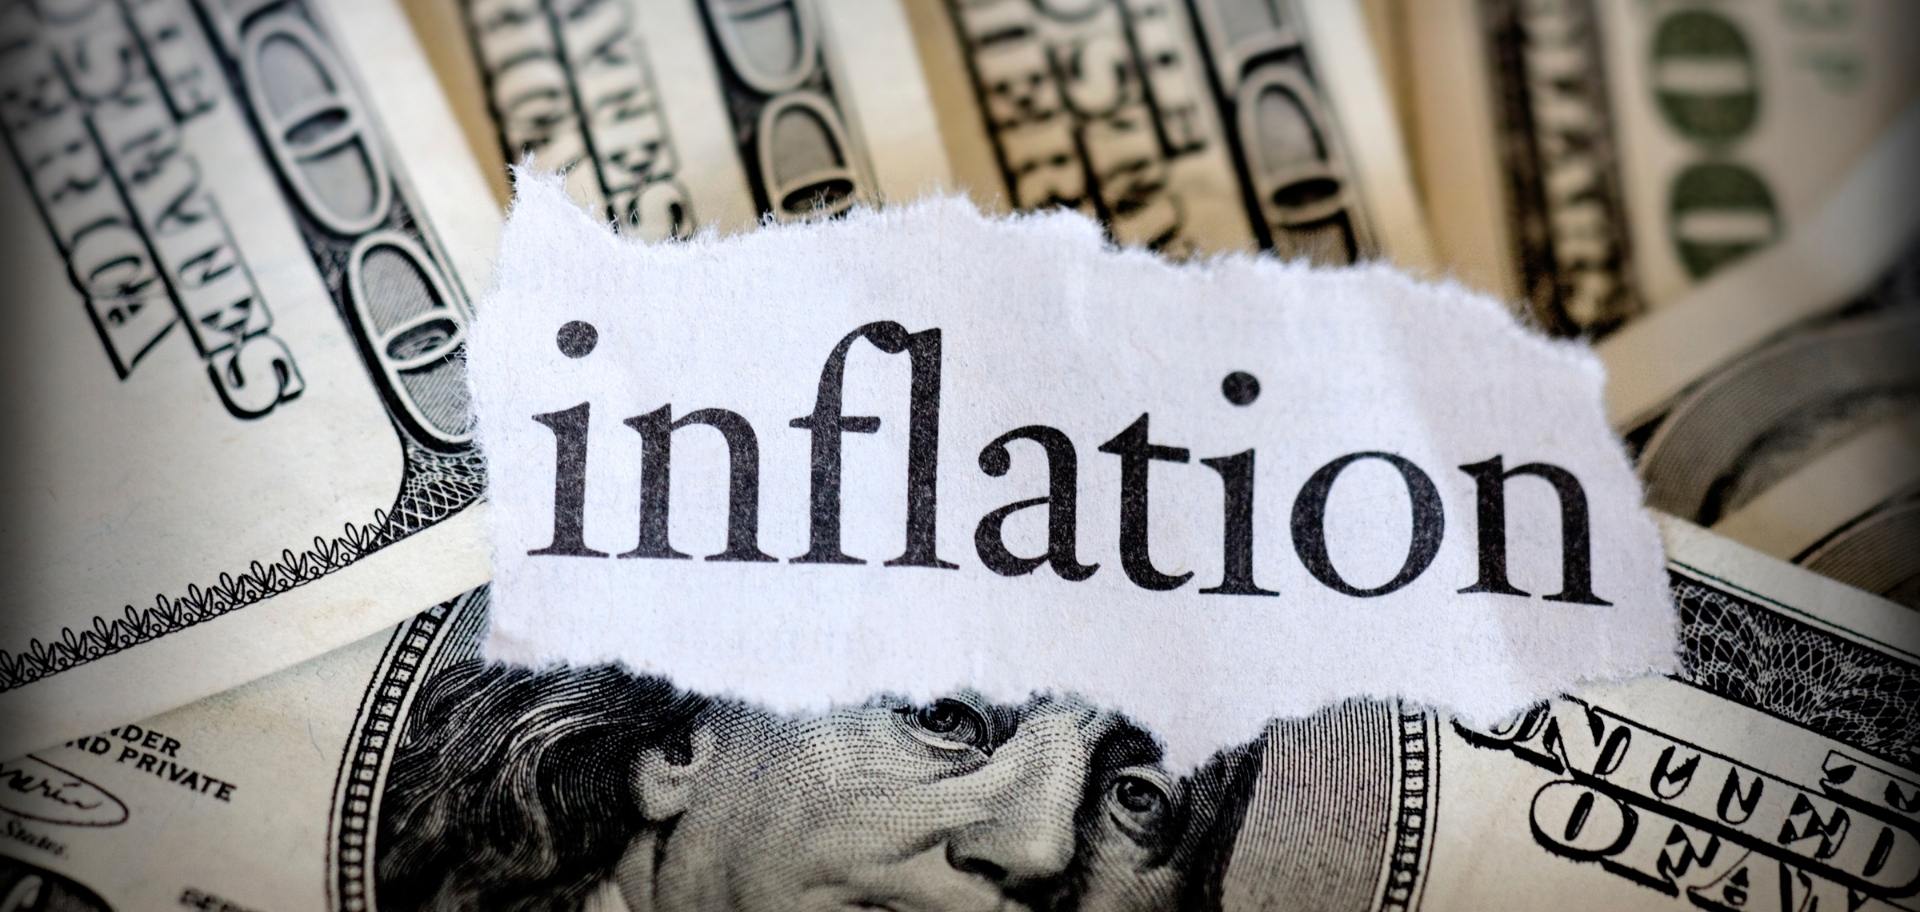 Some relief on inflation – or is there?